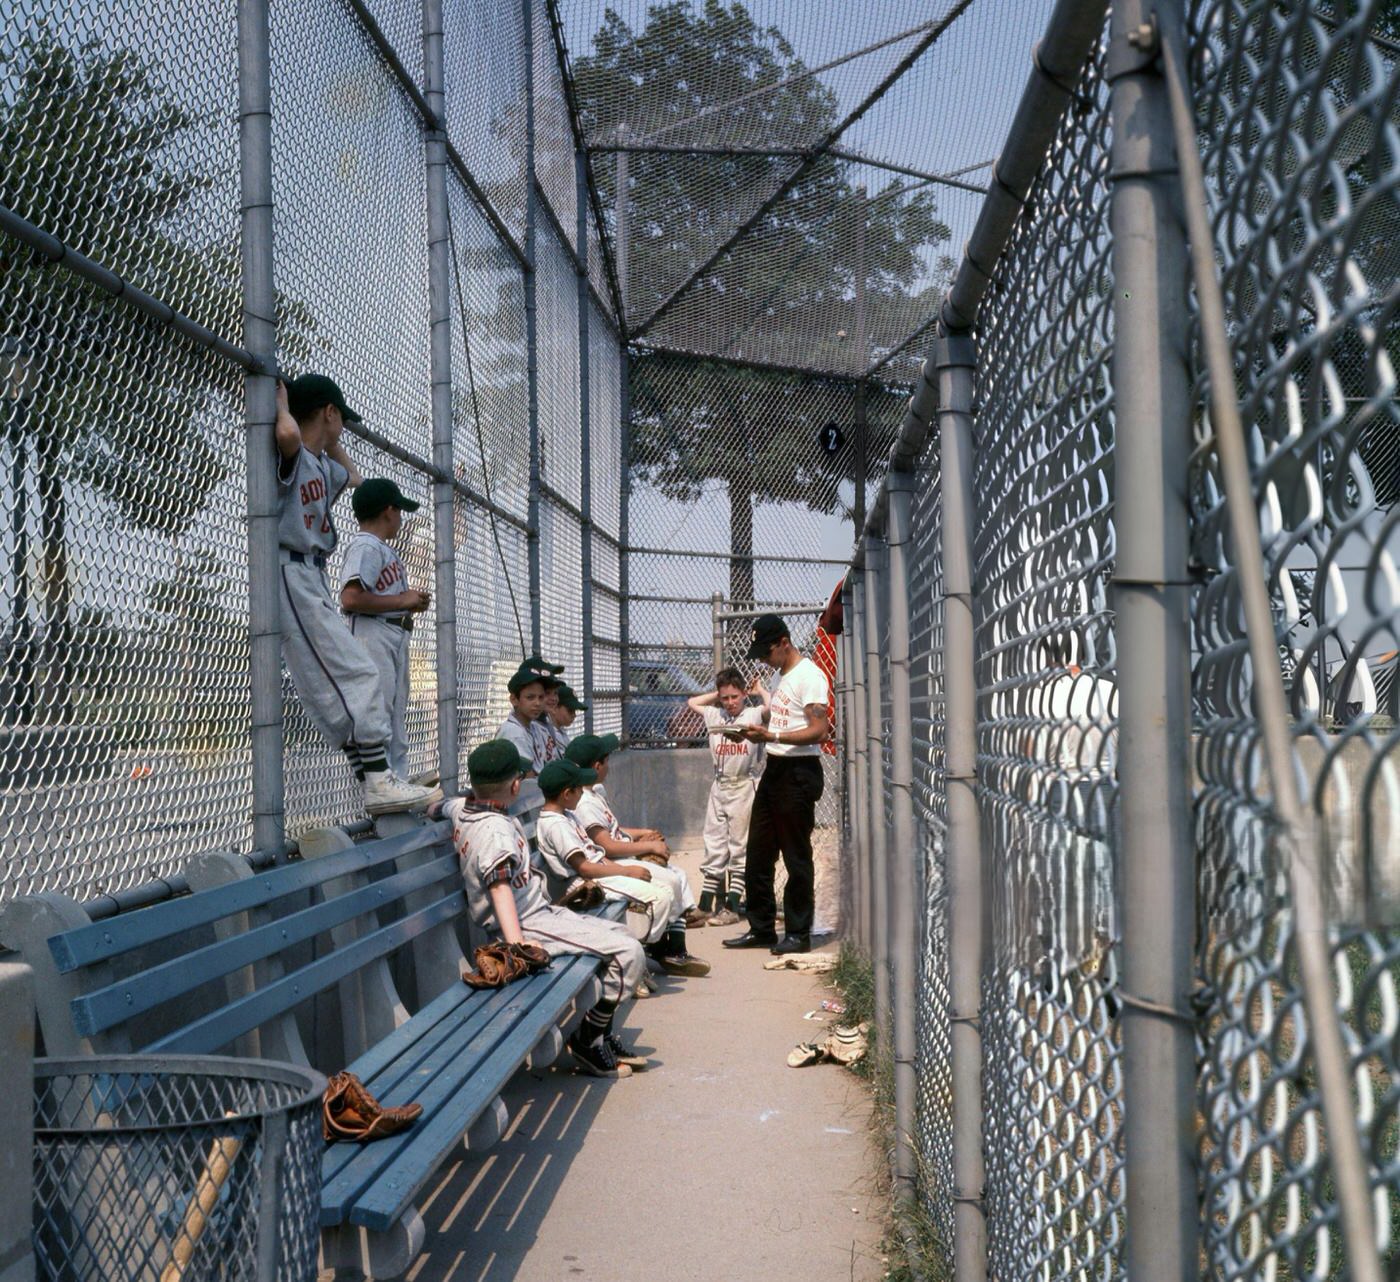 Players From A Boys Club Of Corona Little League Baseball Team With Their Coach In The Dugout, Flushing Meadows Park, 1968.